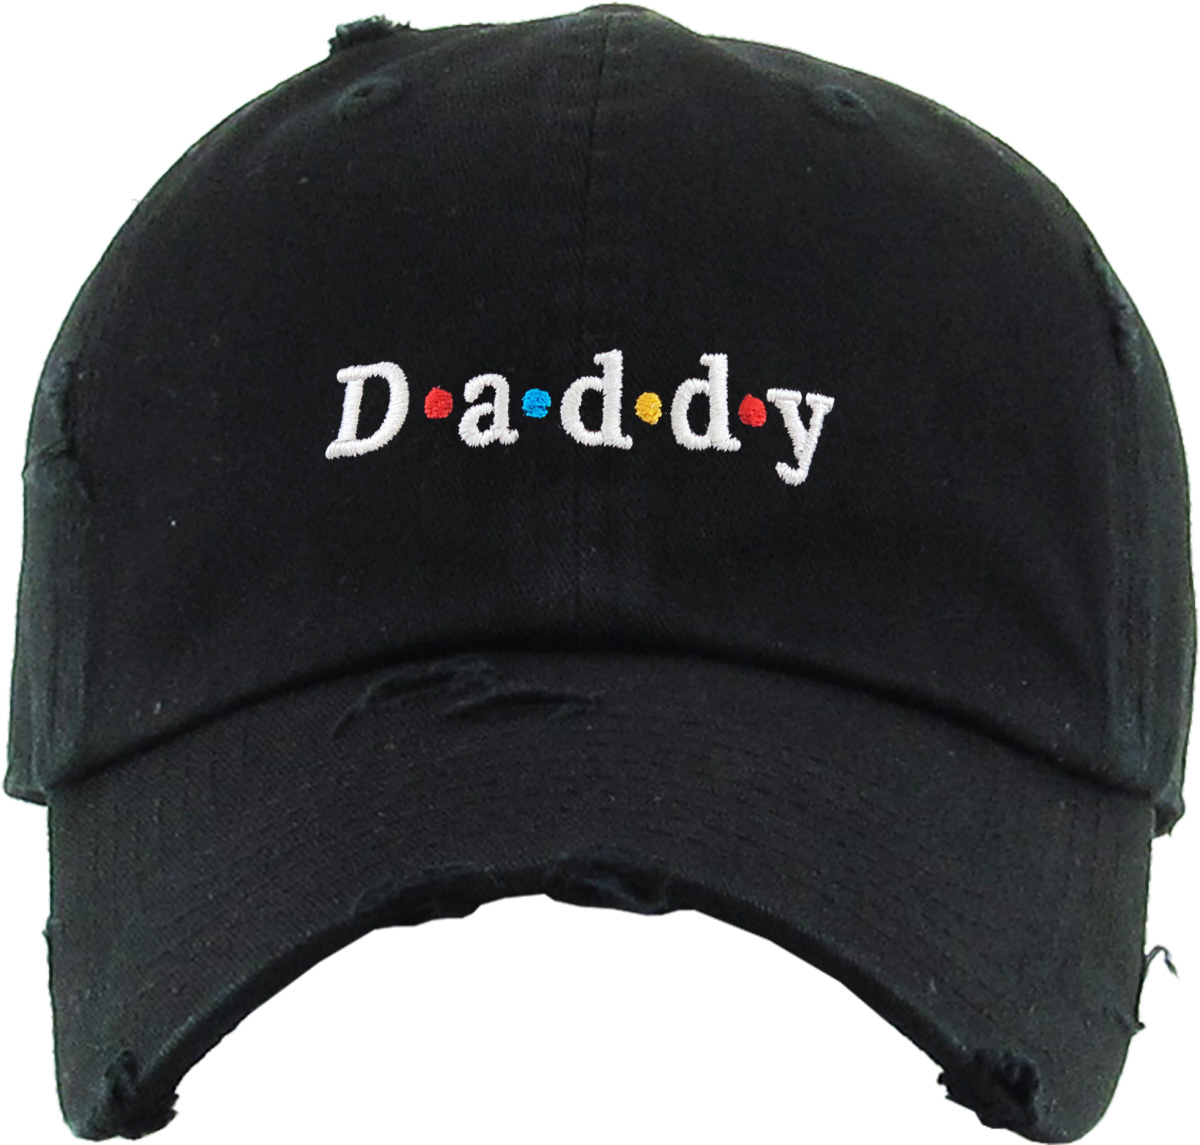 Vintage Dad Hat DaddyEmbroidery - image 2 of 4